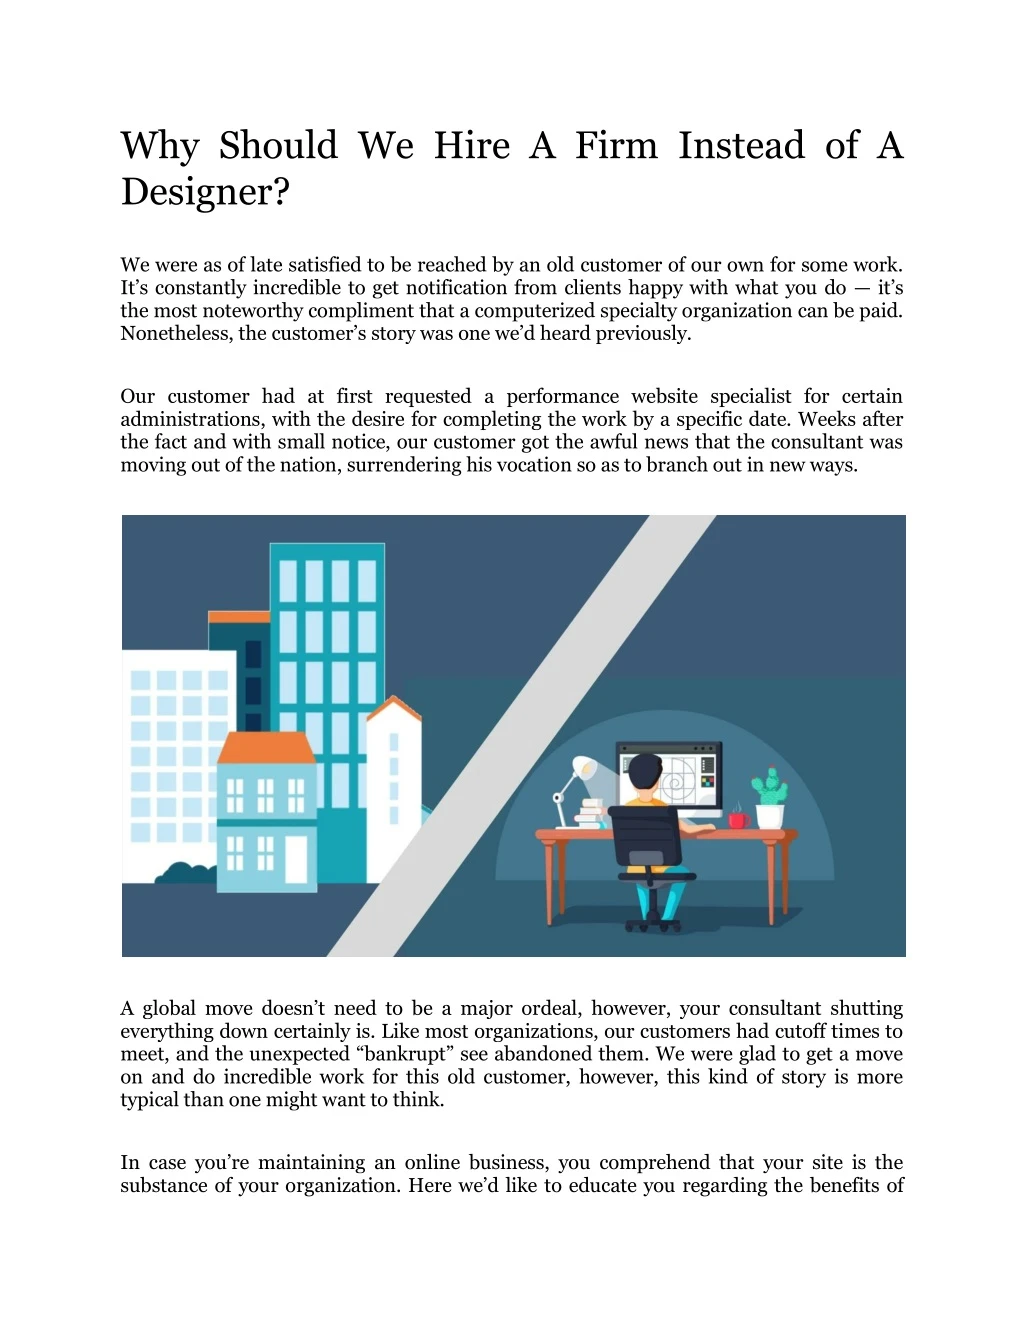 why should we hire a firm instead of a designer